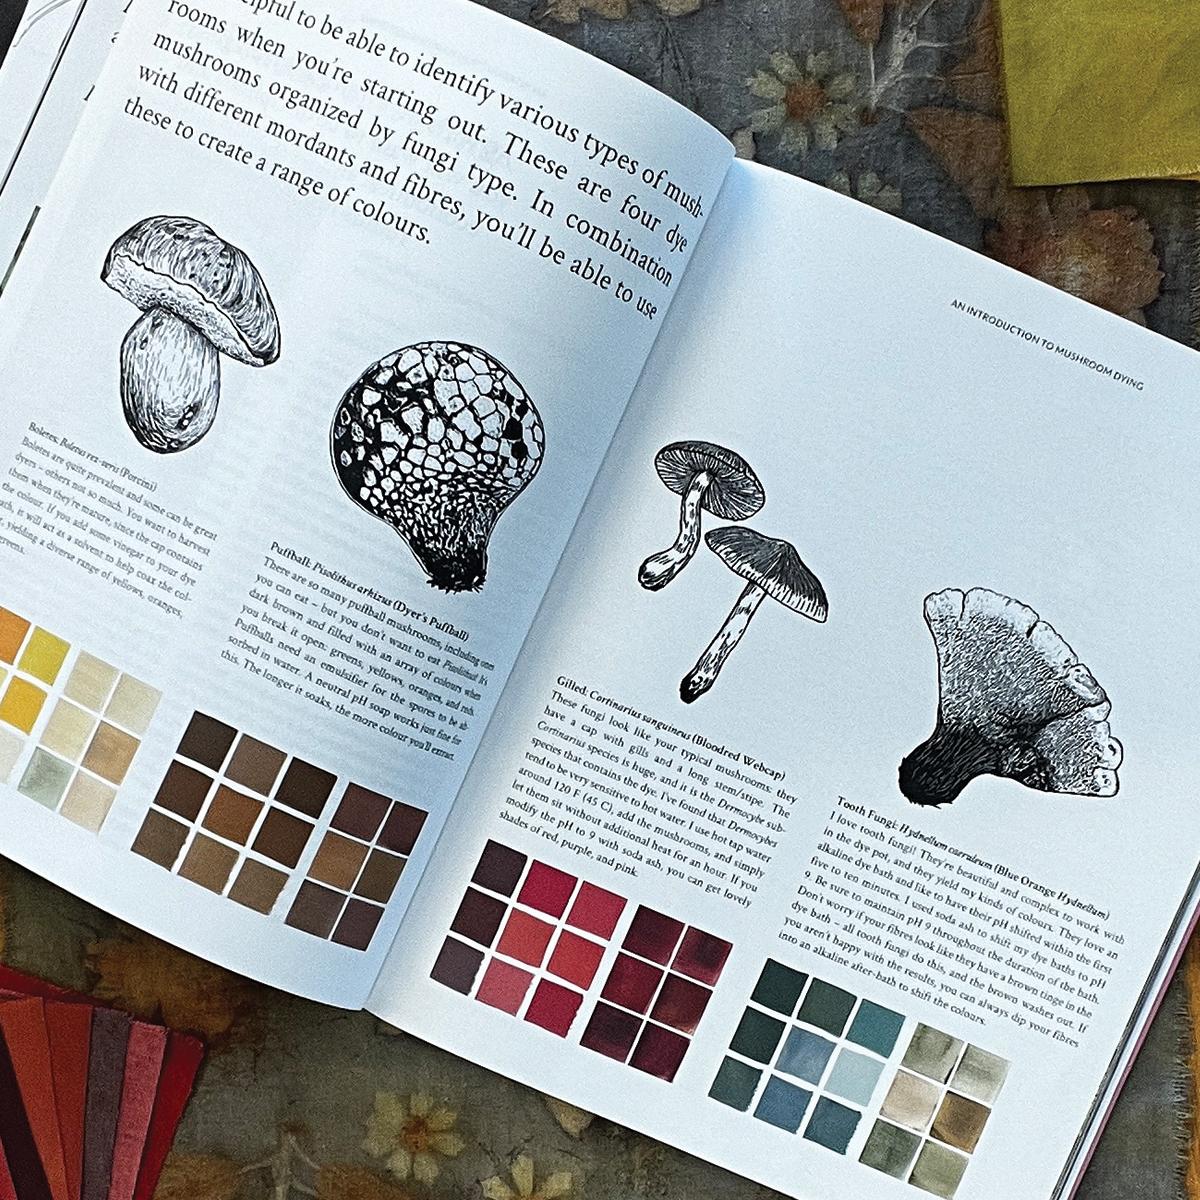 Dye mushrooms from the Mushroom Color Atlas featured in Tauko.